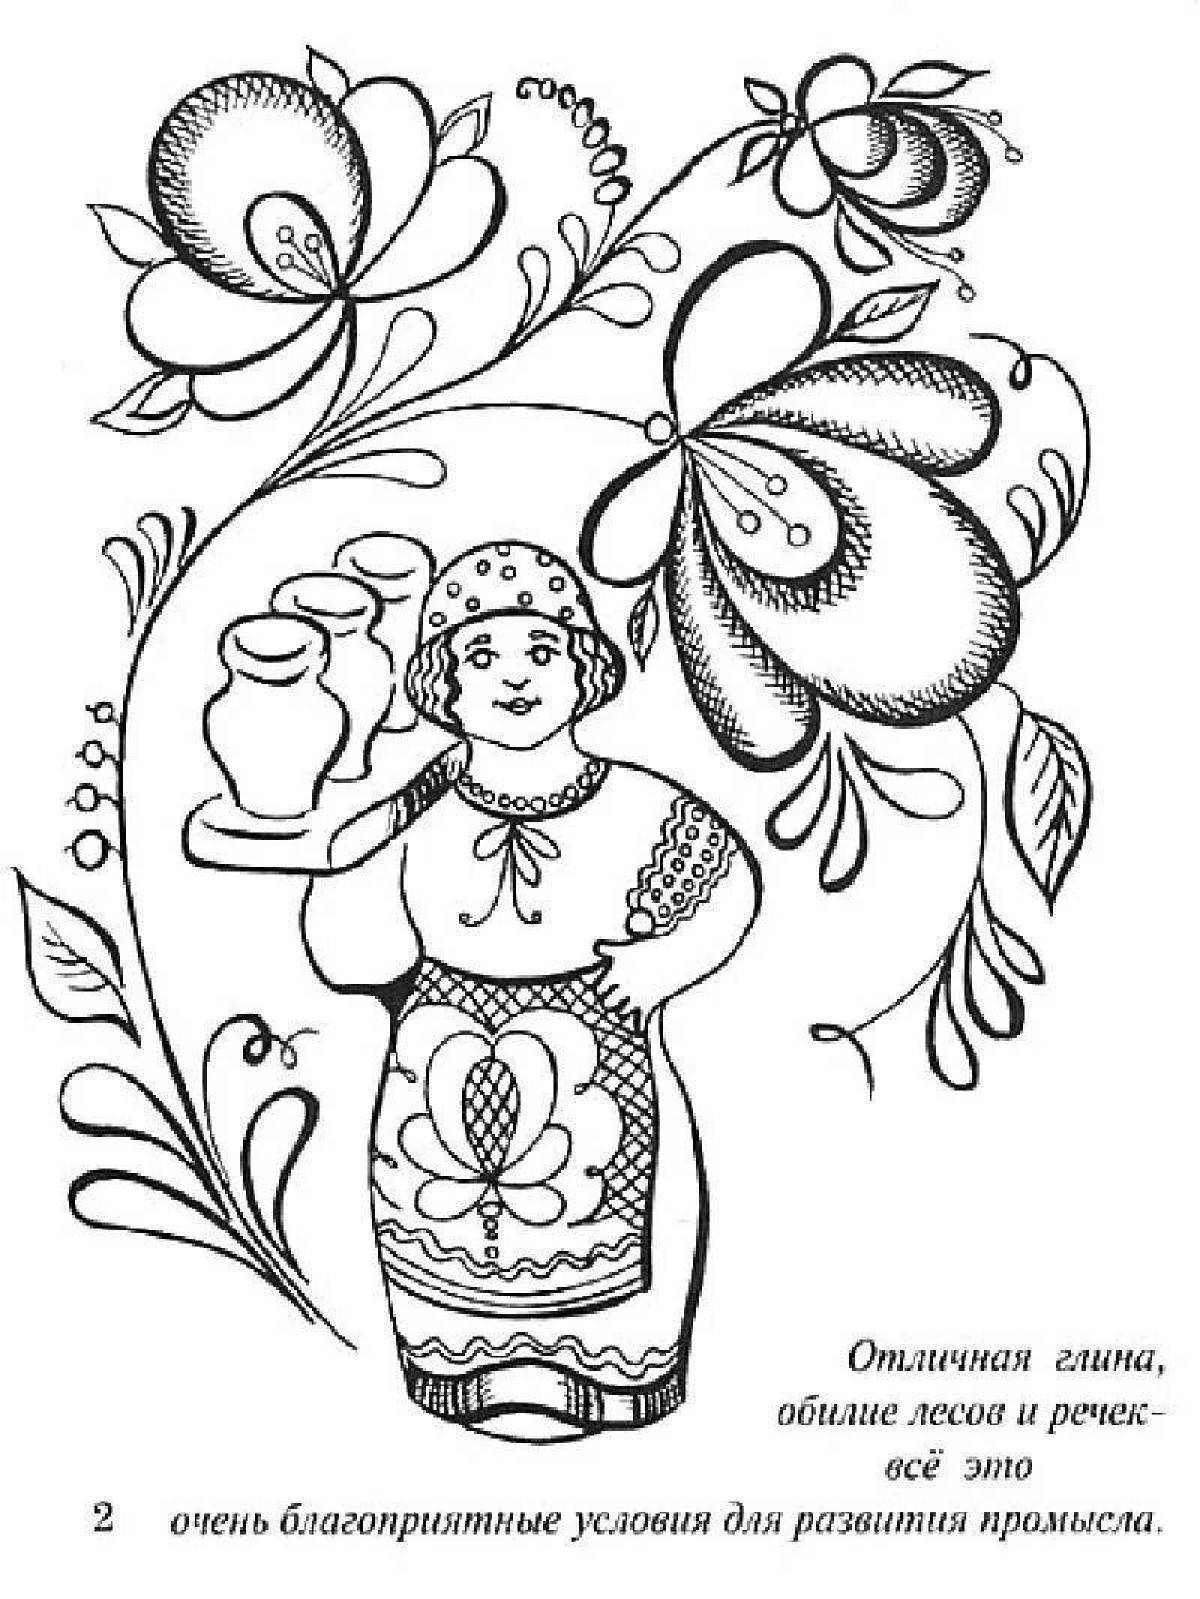 Coloring pages of folk crafts for children